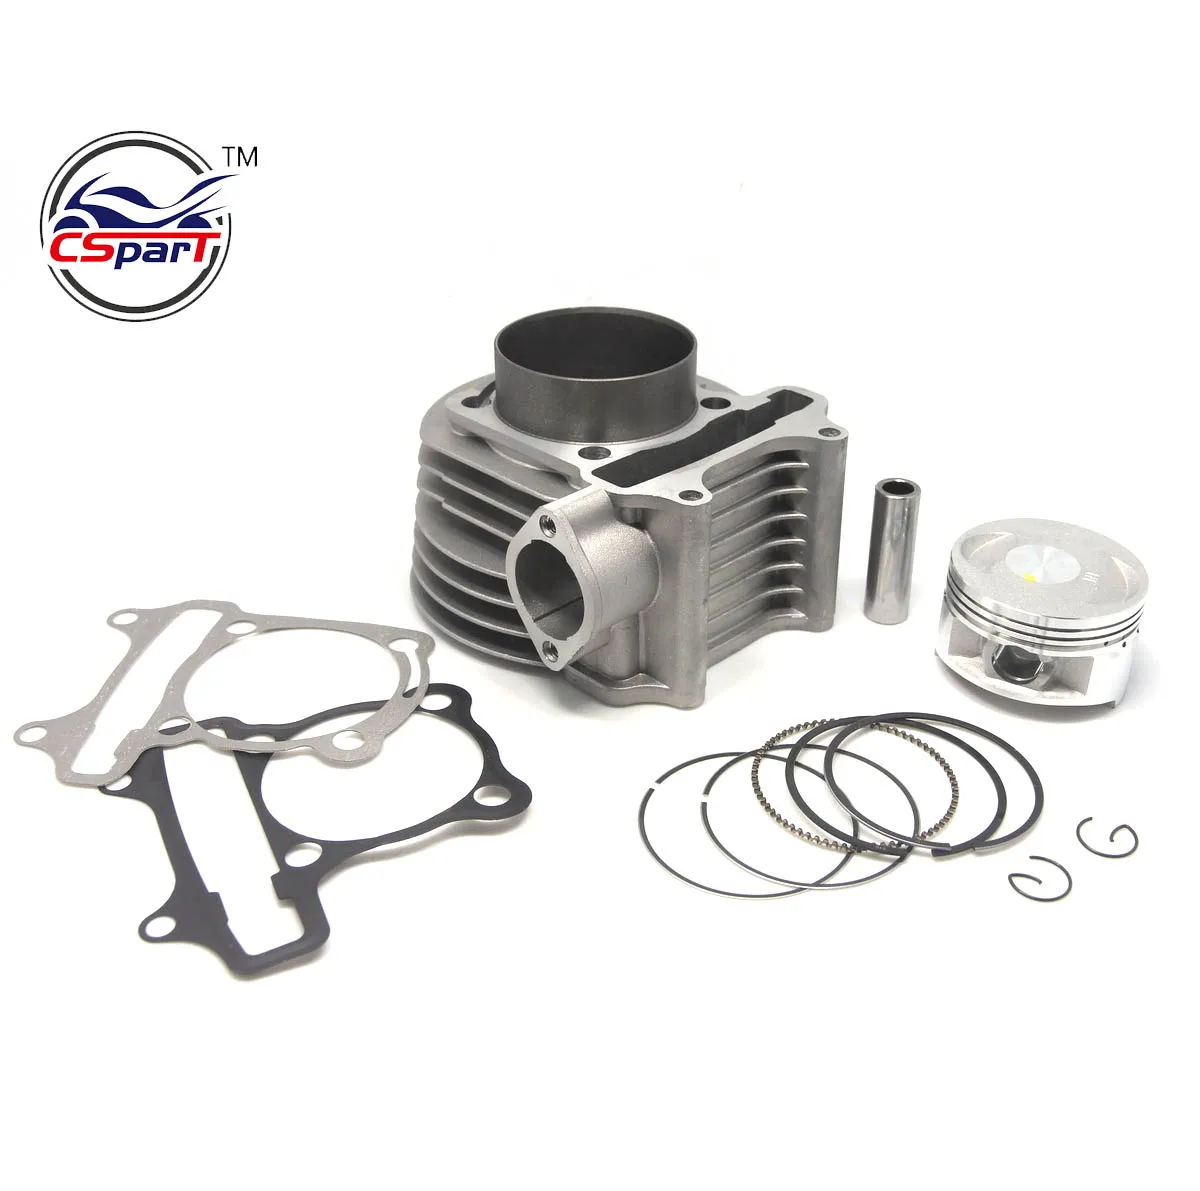 GY6125/150cc RACING CYLINDER SET 60.0m/m SRP DON'T NEED BORE UP 